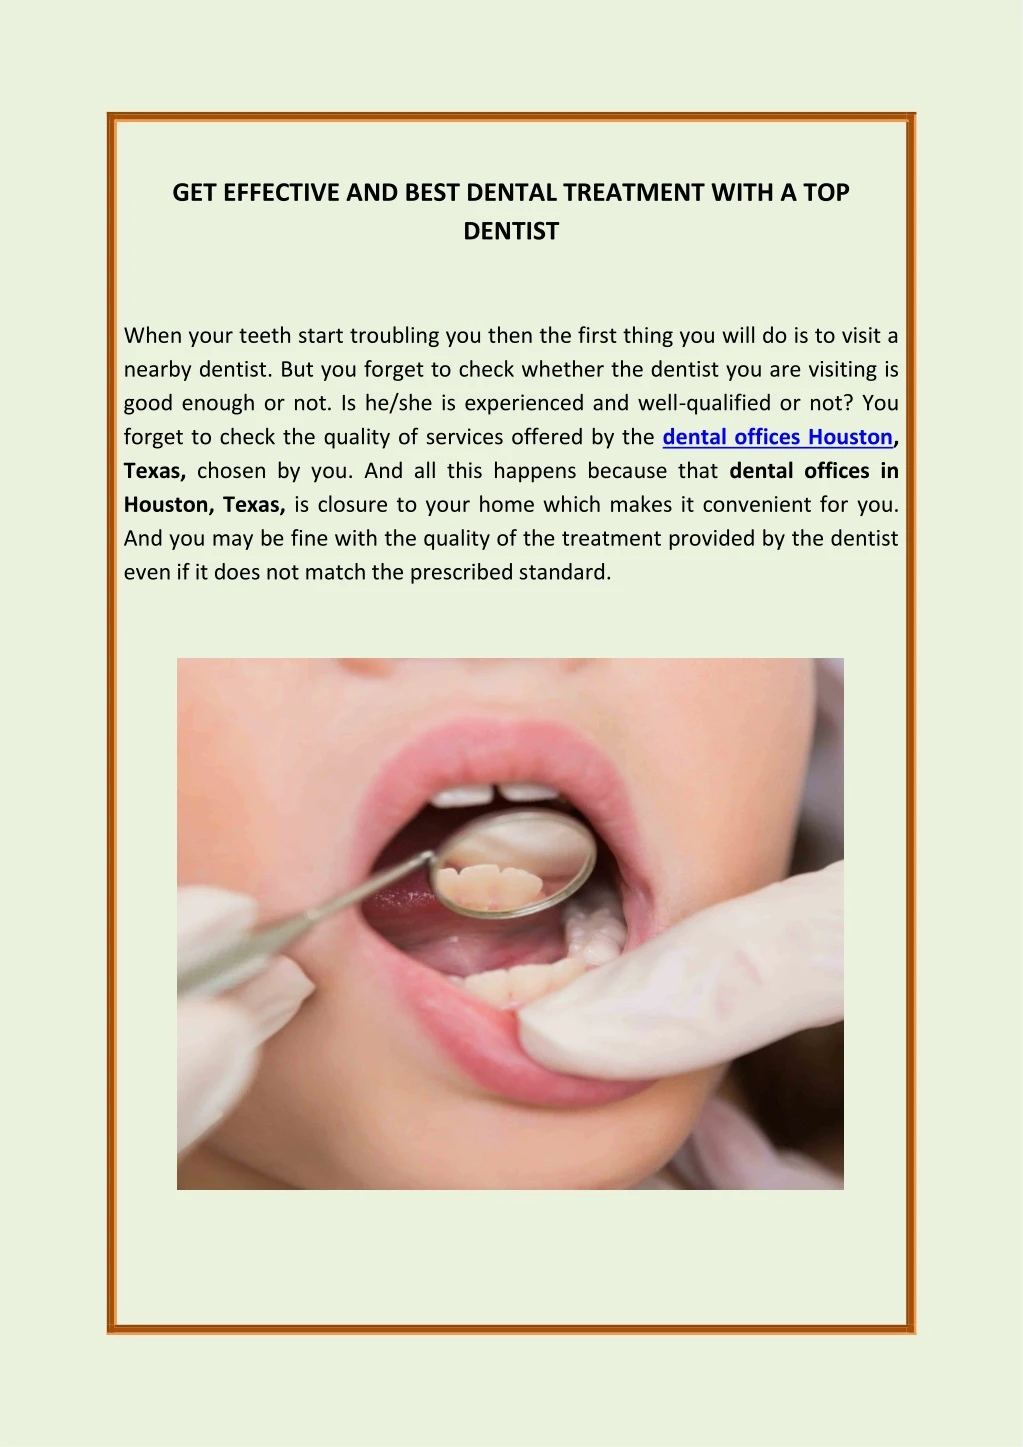 get effective and best dental treatment with